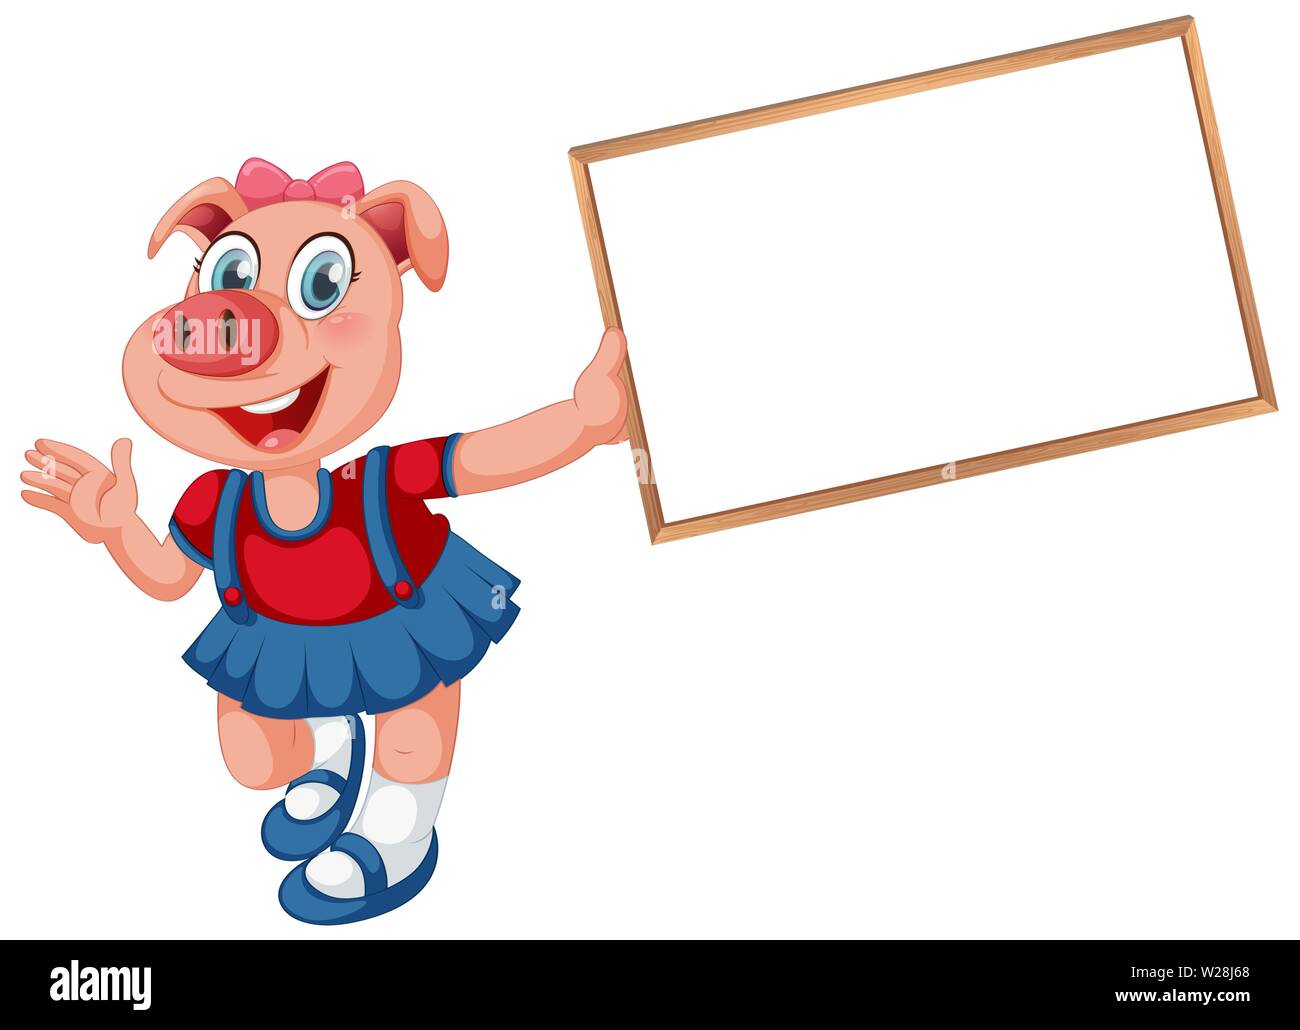 A pig banner template illustration Stock Vector